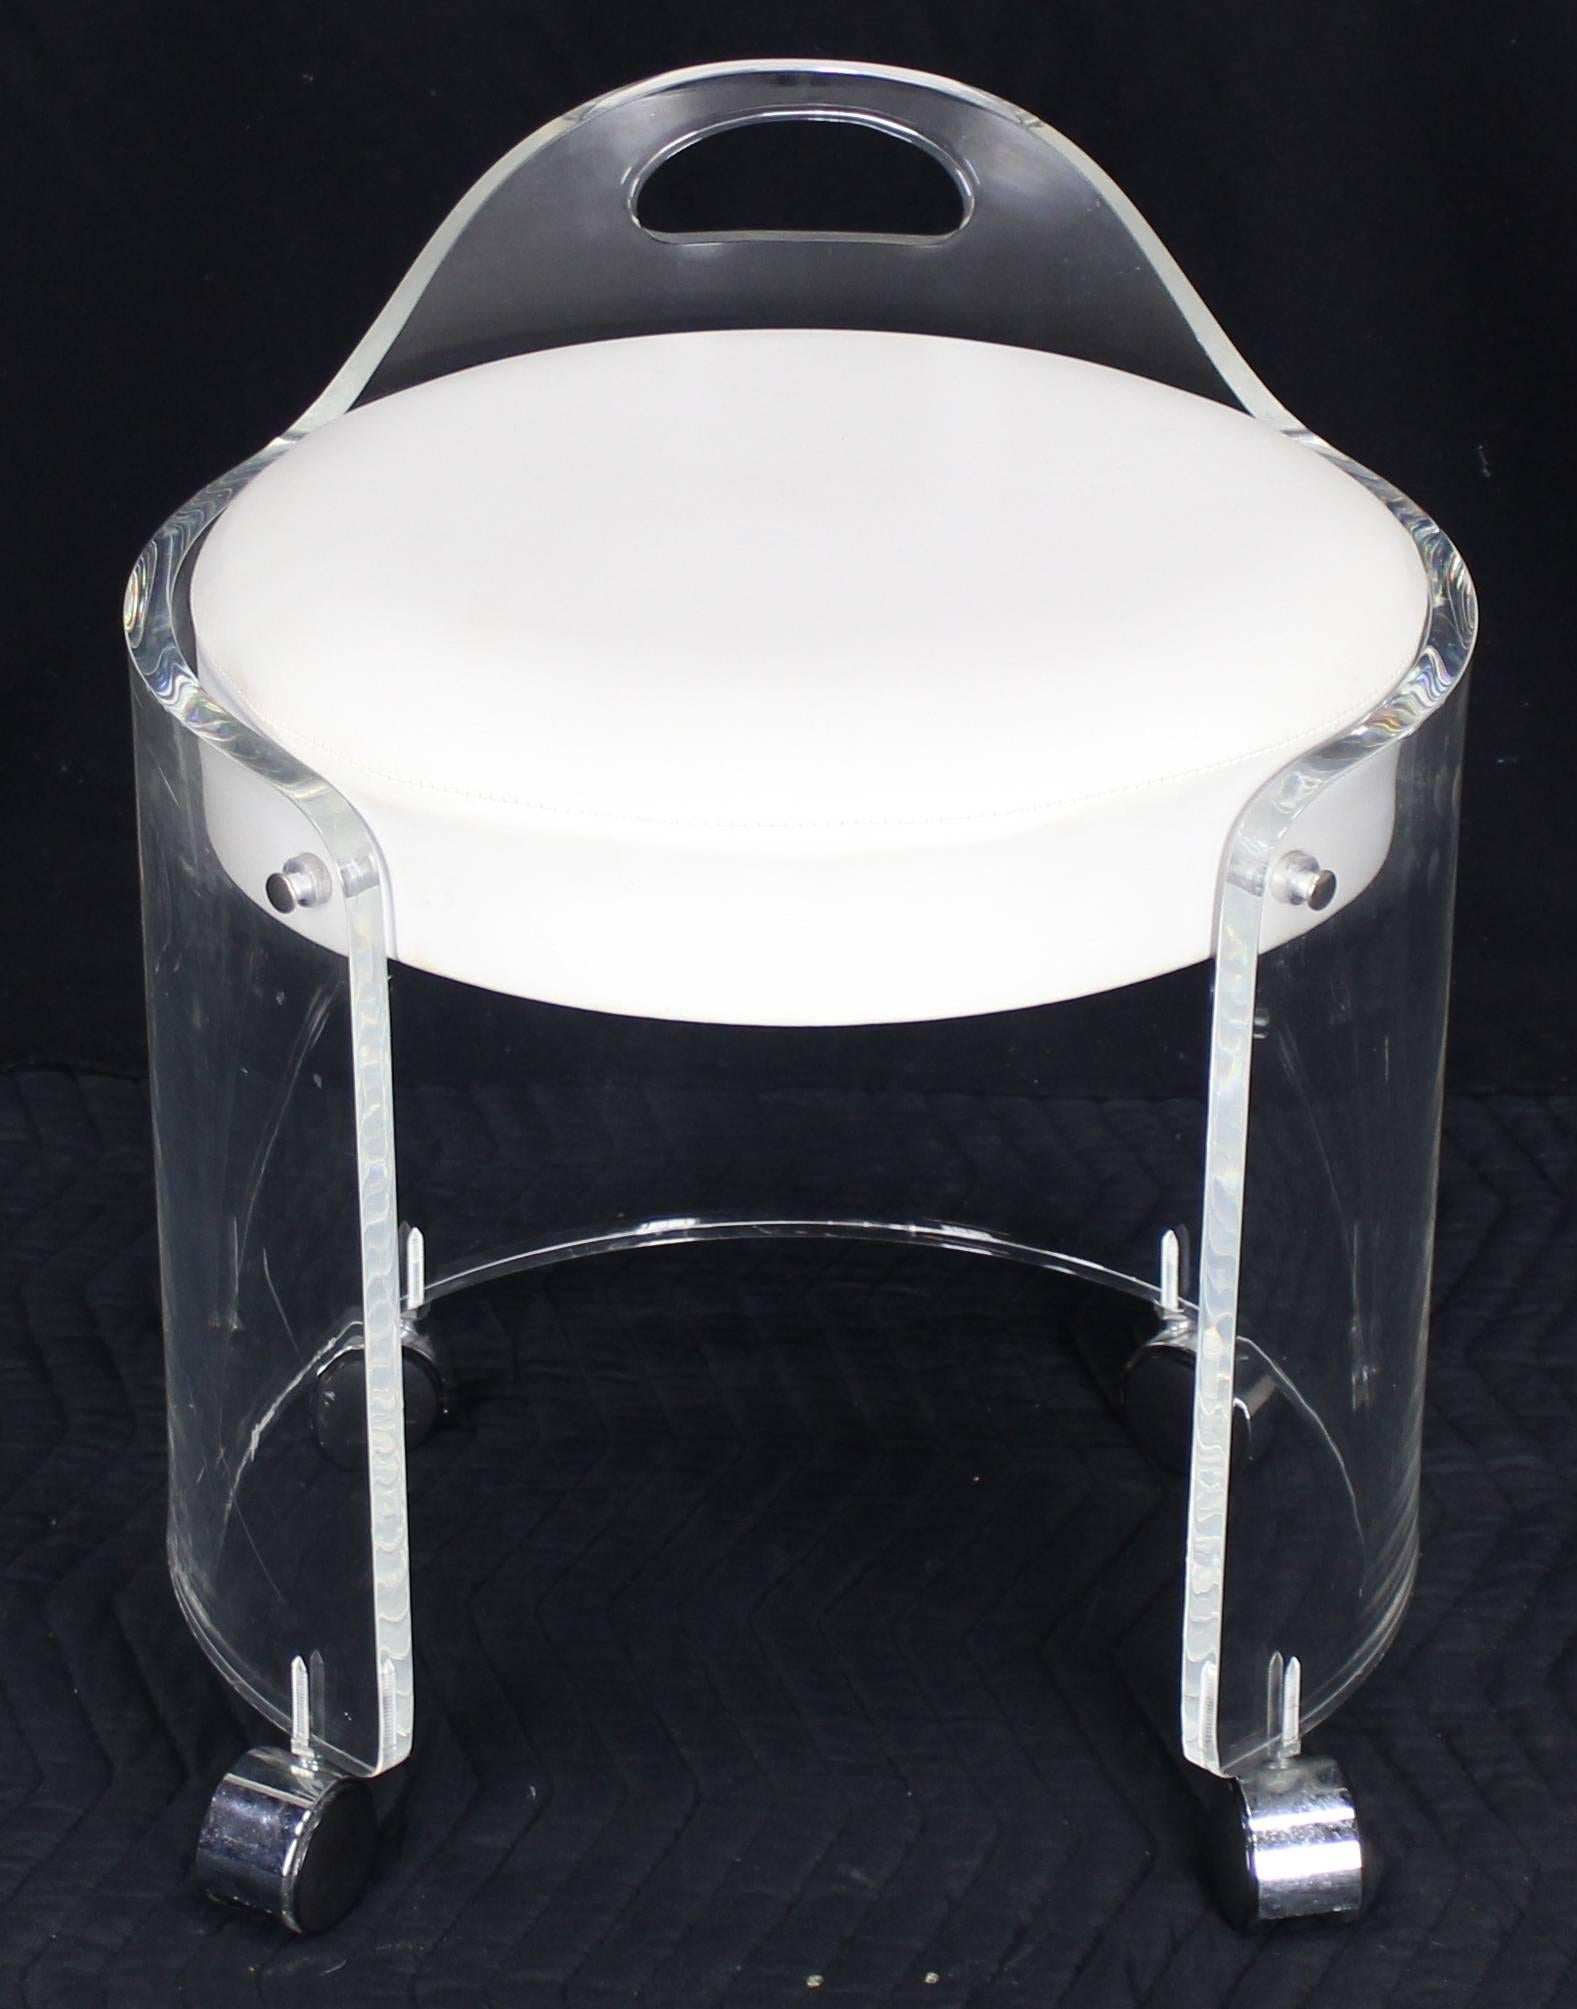 Mid-Century Modern round upholstered bent Lucite stool on wheels. Thick Lucite solid and steady design.